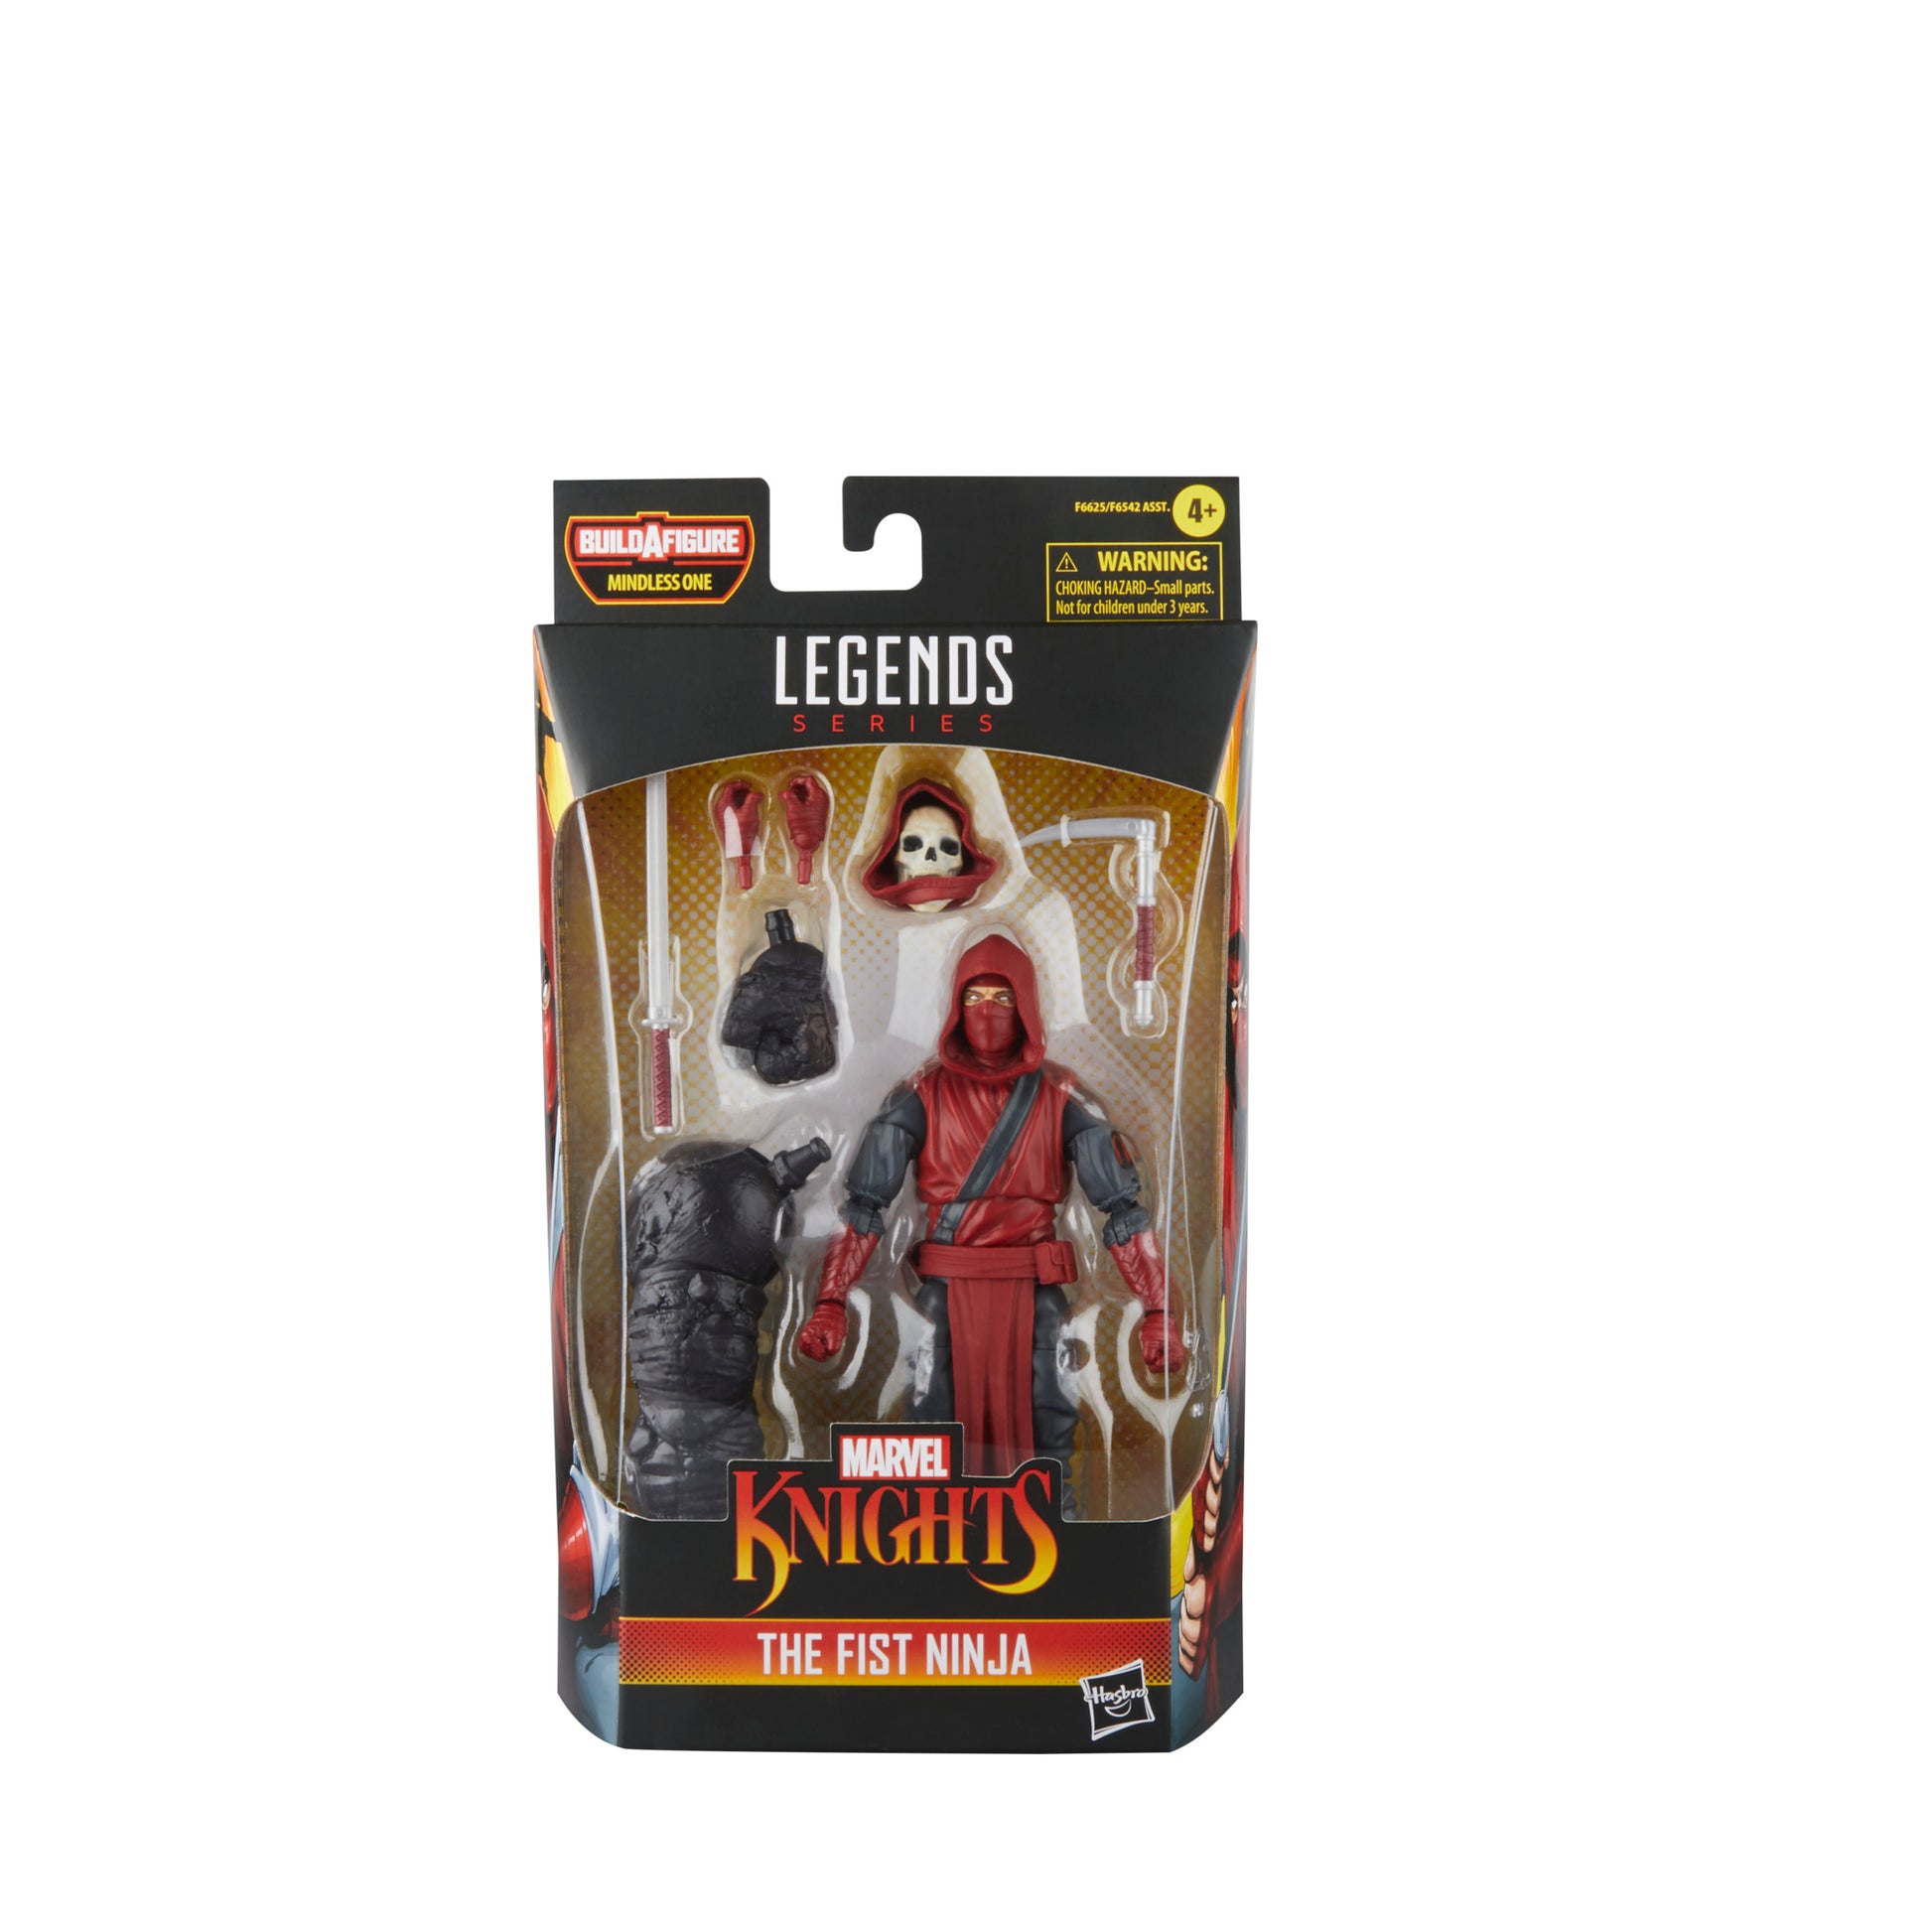 Hasbro Marvel Legends Series The Fist Ninja Action Figure Toy front package - Heretoserveyou